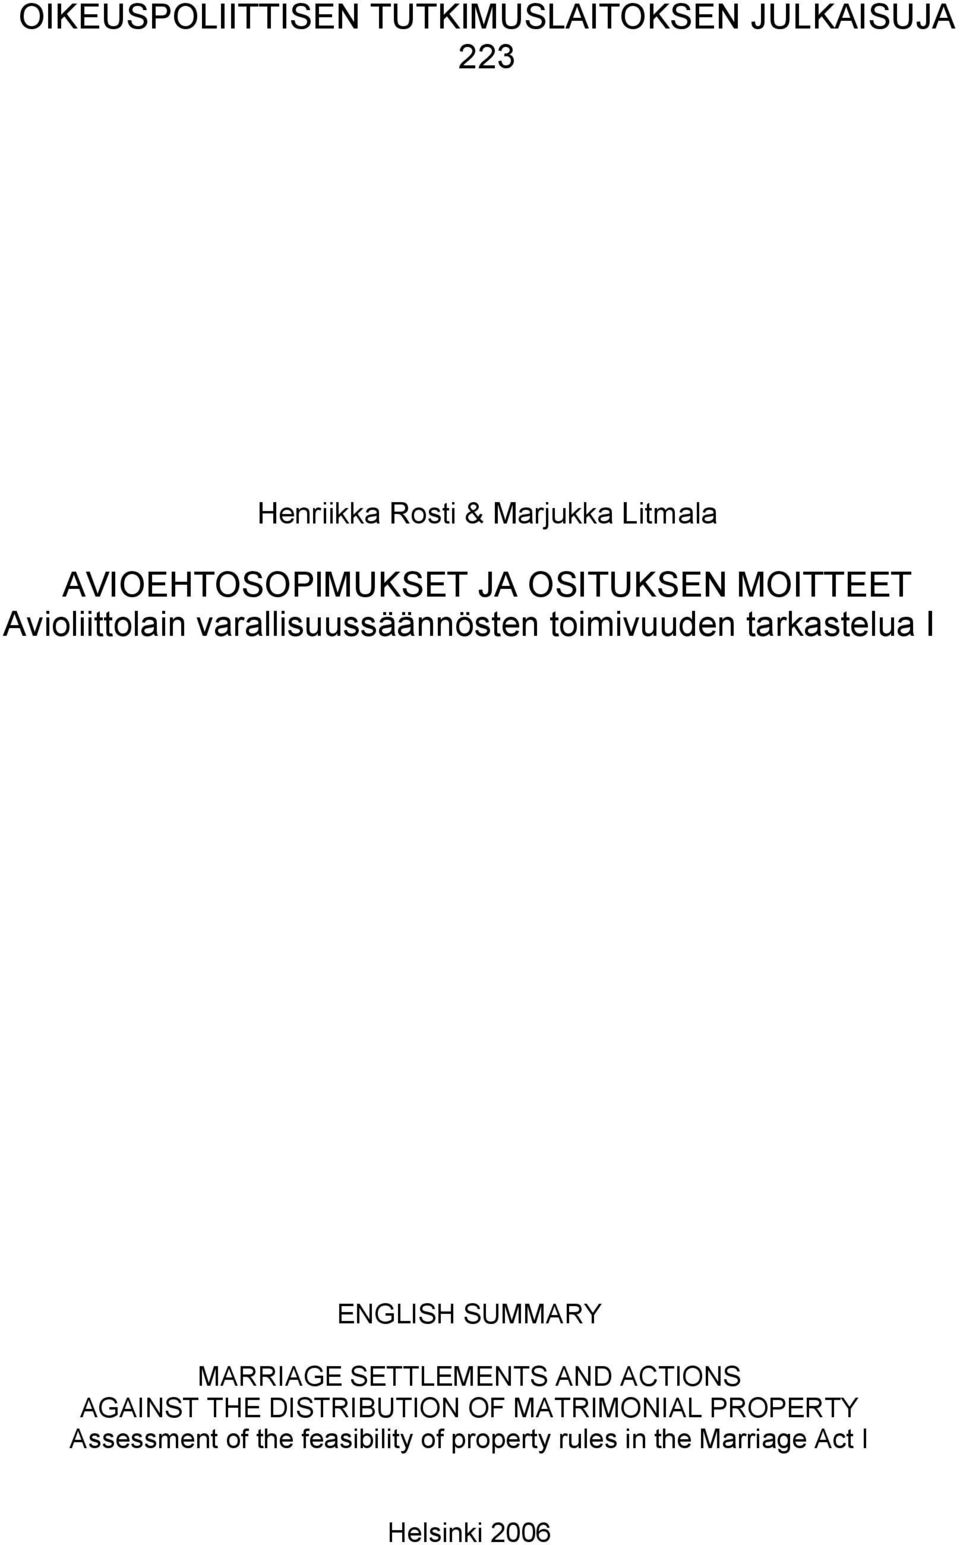 tarkastelua I ENGLISH SUMMARY MARRIAGE SETTLEMENTS AND ACTIONS AGAINST THE DISTRIBUTION OF